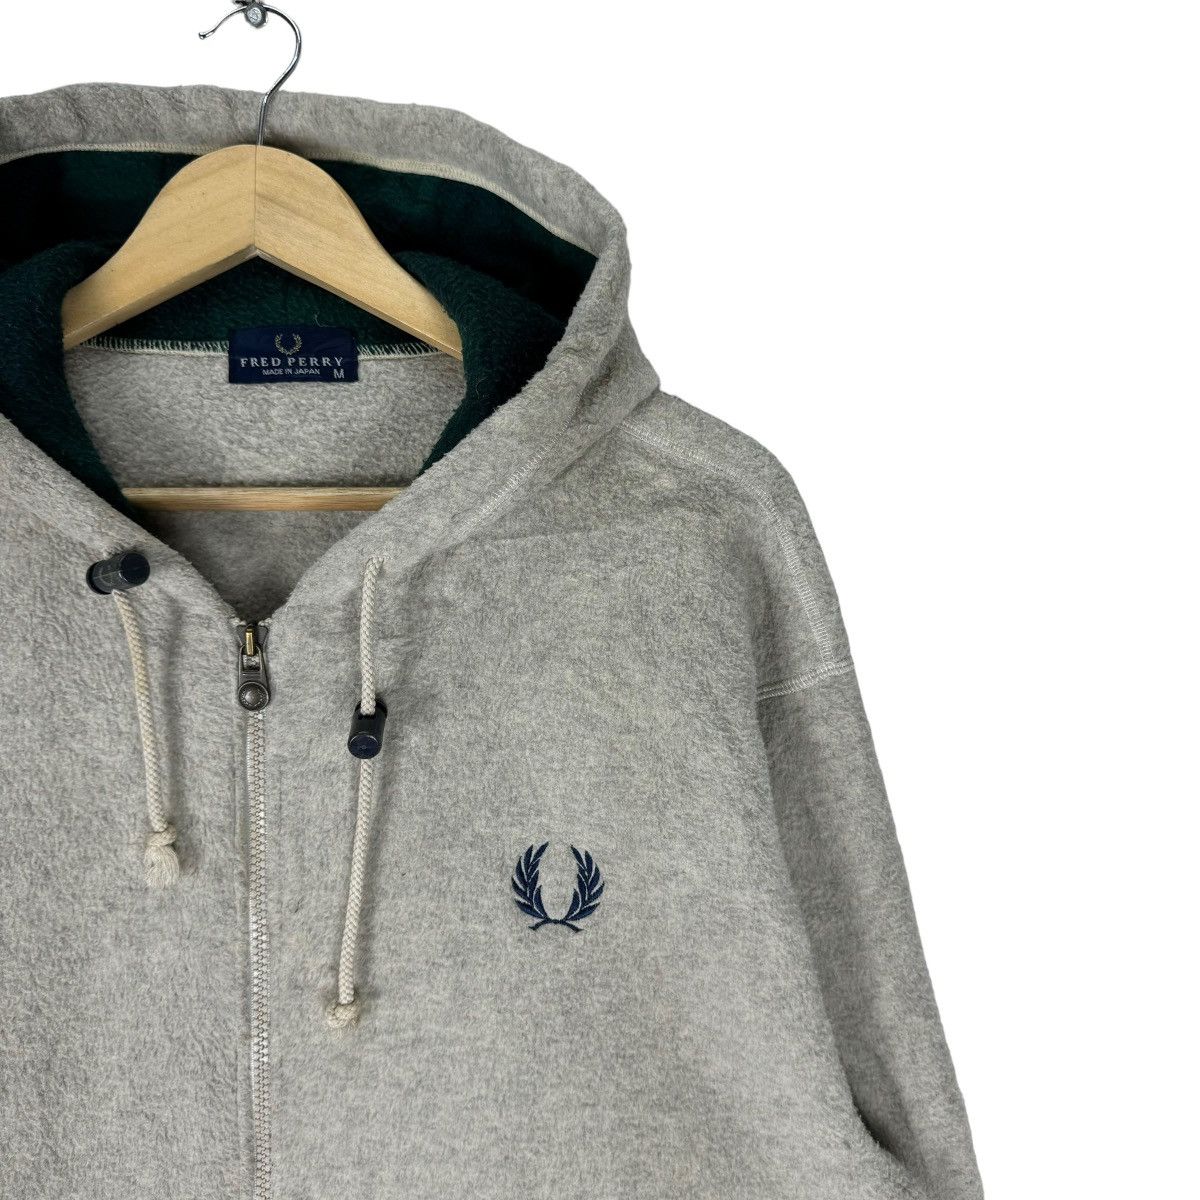 ❄️FRED PERRY HOODIE FLEECE SWEATER - 4